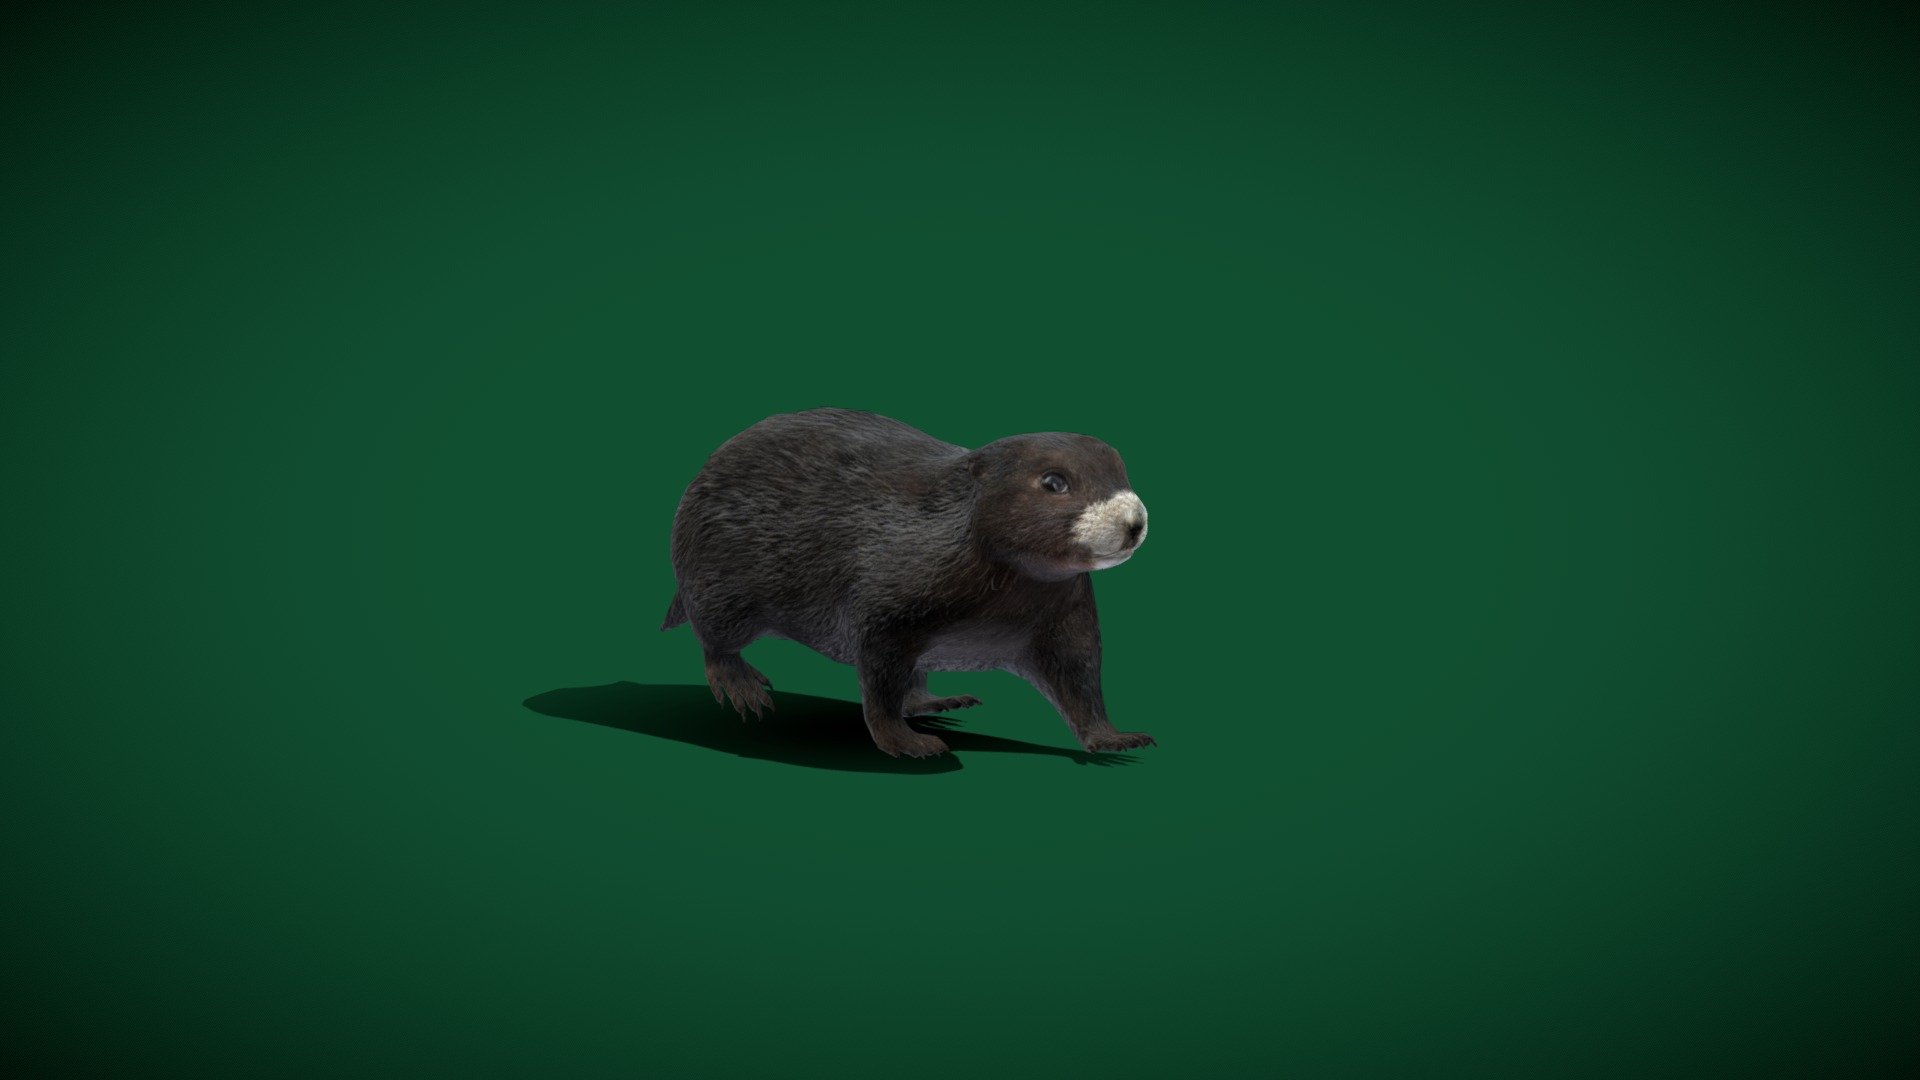 Vancouver Island marmot (Rodents) 

Marmota vancouverensis Animal Sciuridae (Critically Endangered)

1 Draw Calls

Lowpoly

GameReady

15 Animations

4K PBR Textures Material

Unreal FBX

Unity FBX  

Blend File 

USDZ File (AR Ready). Real Scale Dimension

Textures Files

GLB File

Gltf File ( Spark AR, Lens Studio(SnapChat) , Effector(Tiktok) , Spline, Play Canvas ) Compatible

Triangles : 8376

Vertices  : 4224

Faces     : 4204

Edges     : 8425
 Diffuse, Metallic, Roughness , Normal Map ,Specular Map,AO,
 The Vancouver Island marmot naturally occurs only in the high mountains of Vancouver Island, in British Columbia. This particular marmot species is large compared to some other marmots, and most other rodents. Wikipedia
Scientific name: Marmota vancouverensis
Conservation status: Critically Endangered (Population decreasing)

 - Vancouver Island Marmot (Lowpoly) - Buy Royalty Free 3D model by Nyilonelycompany 3d model